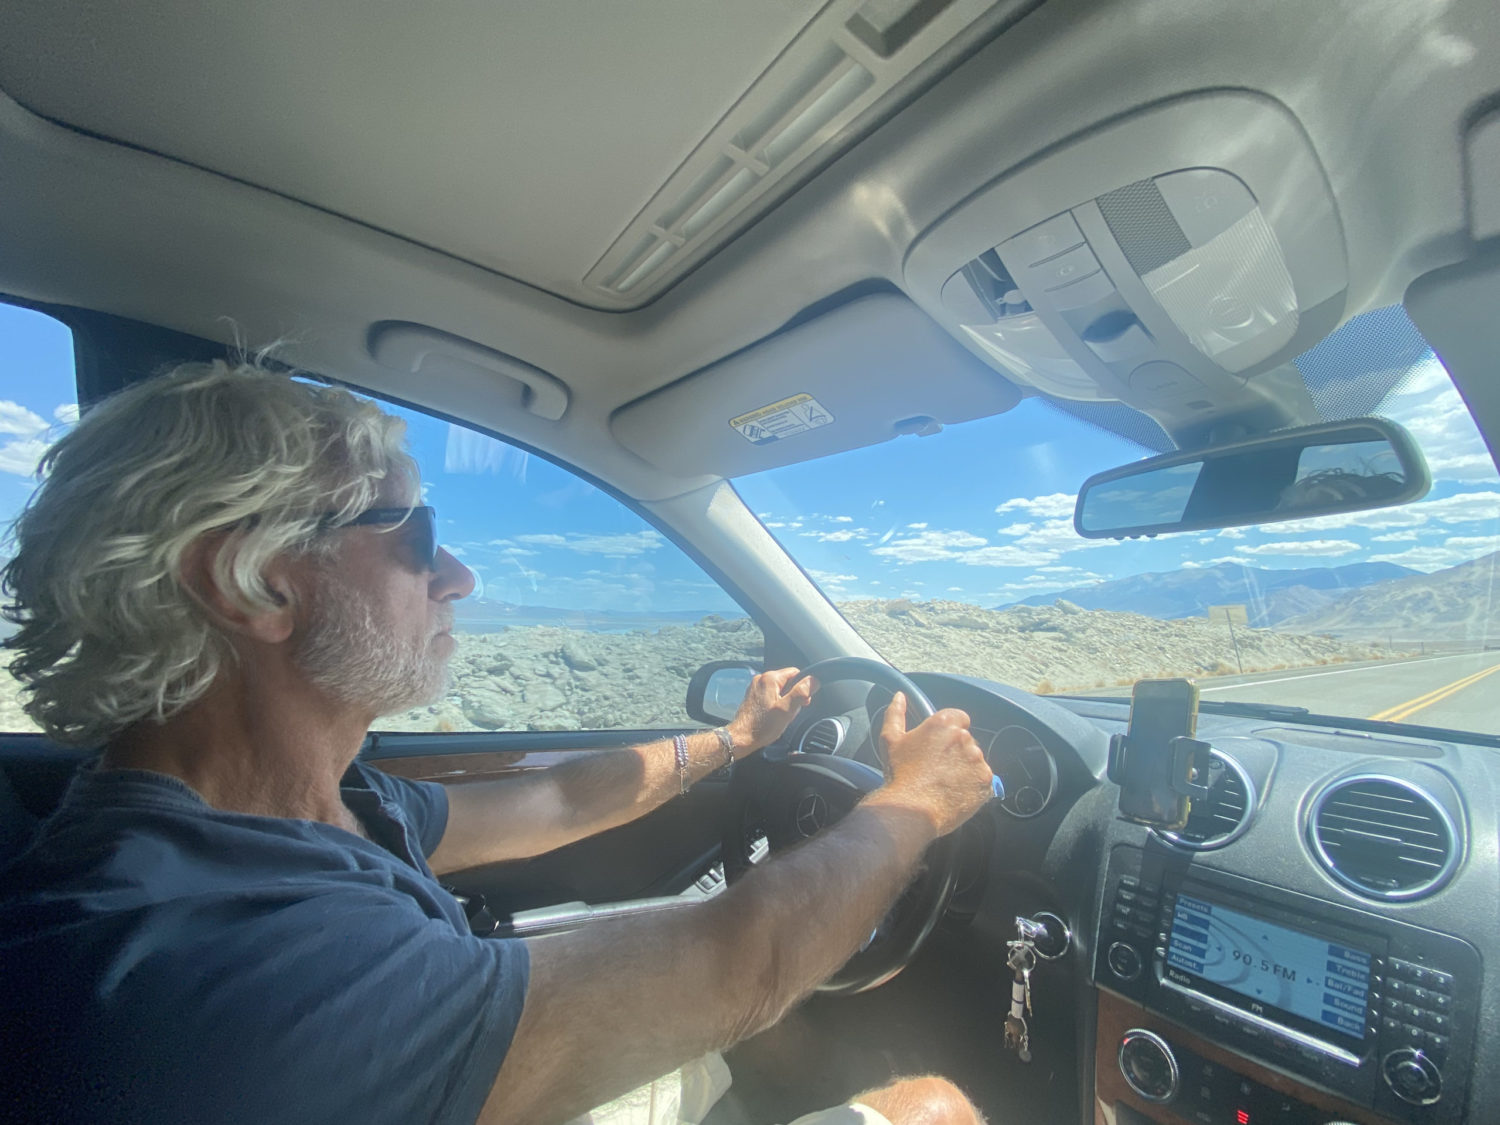 Ric traversing the wild blue of the Mojave